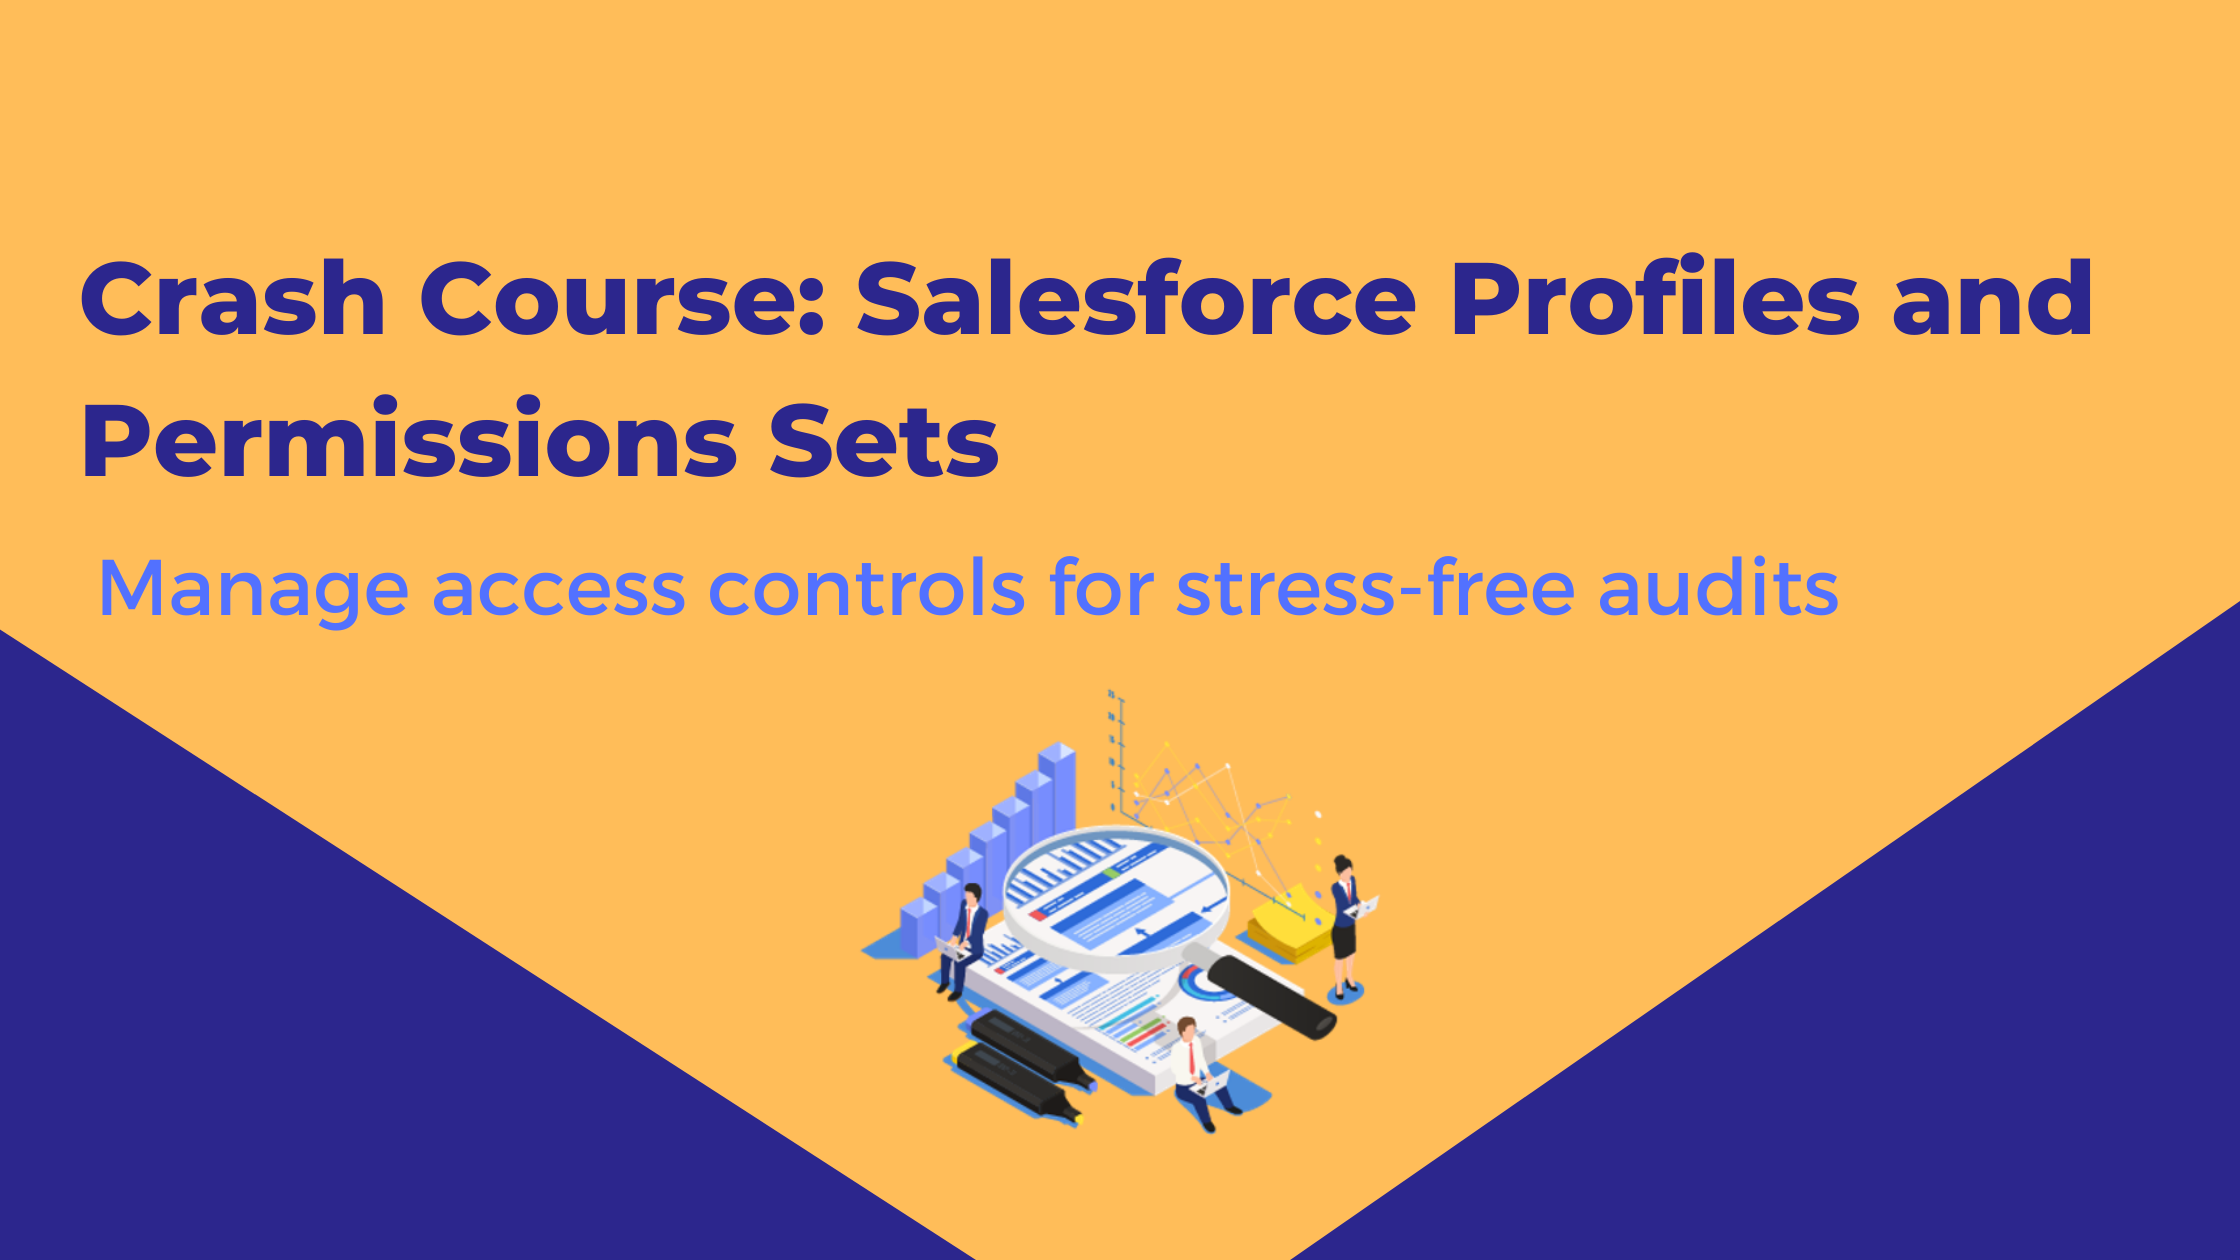 Salesforce Profiles and Permissions Sets